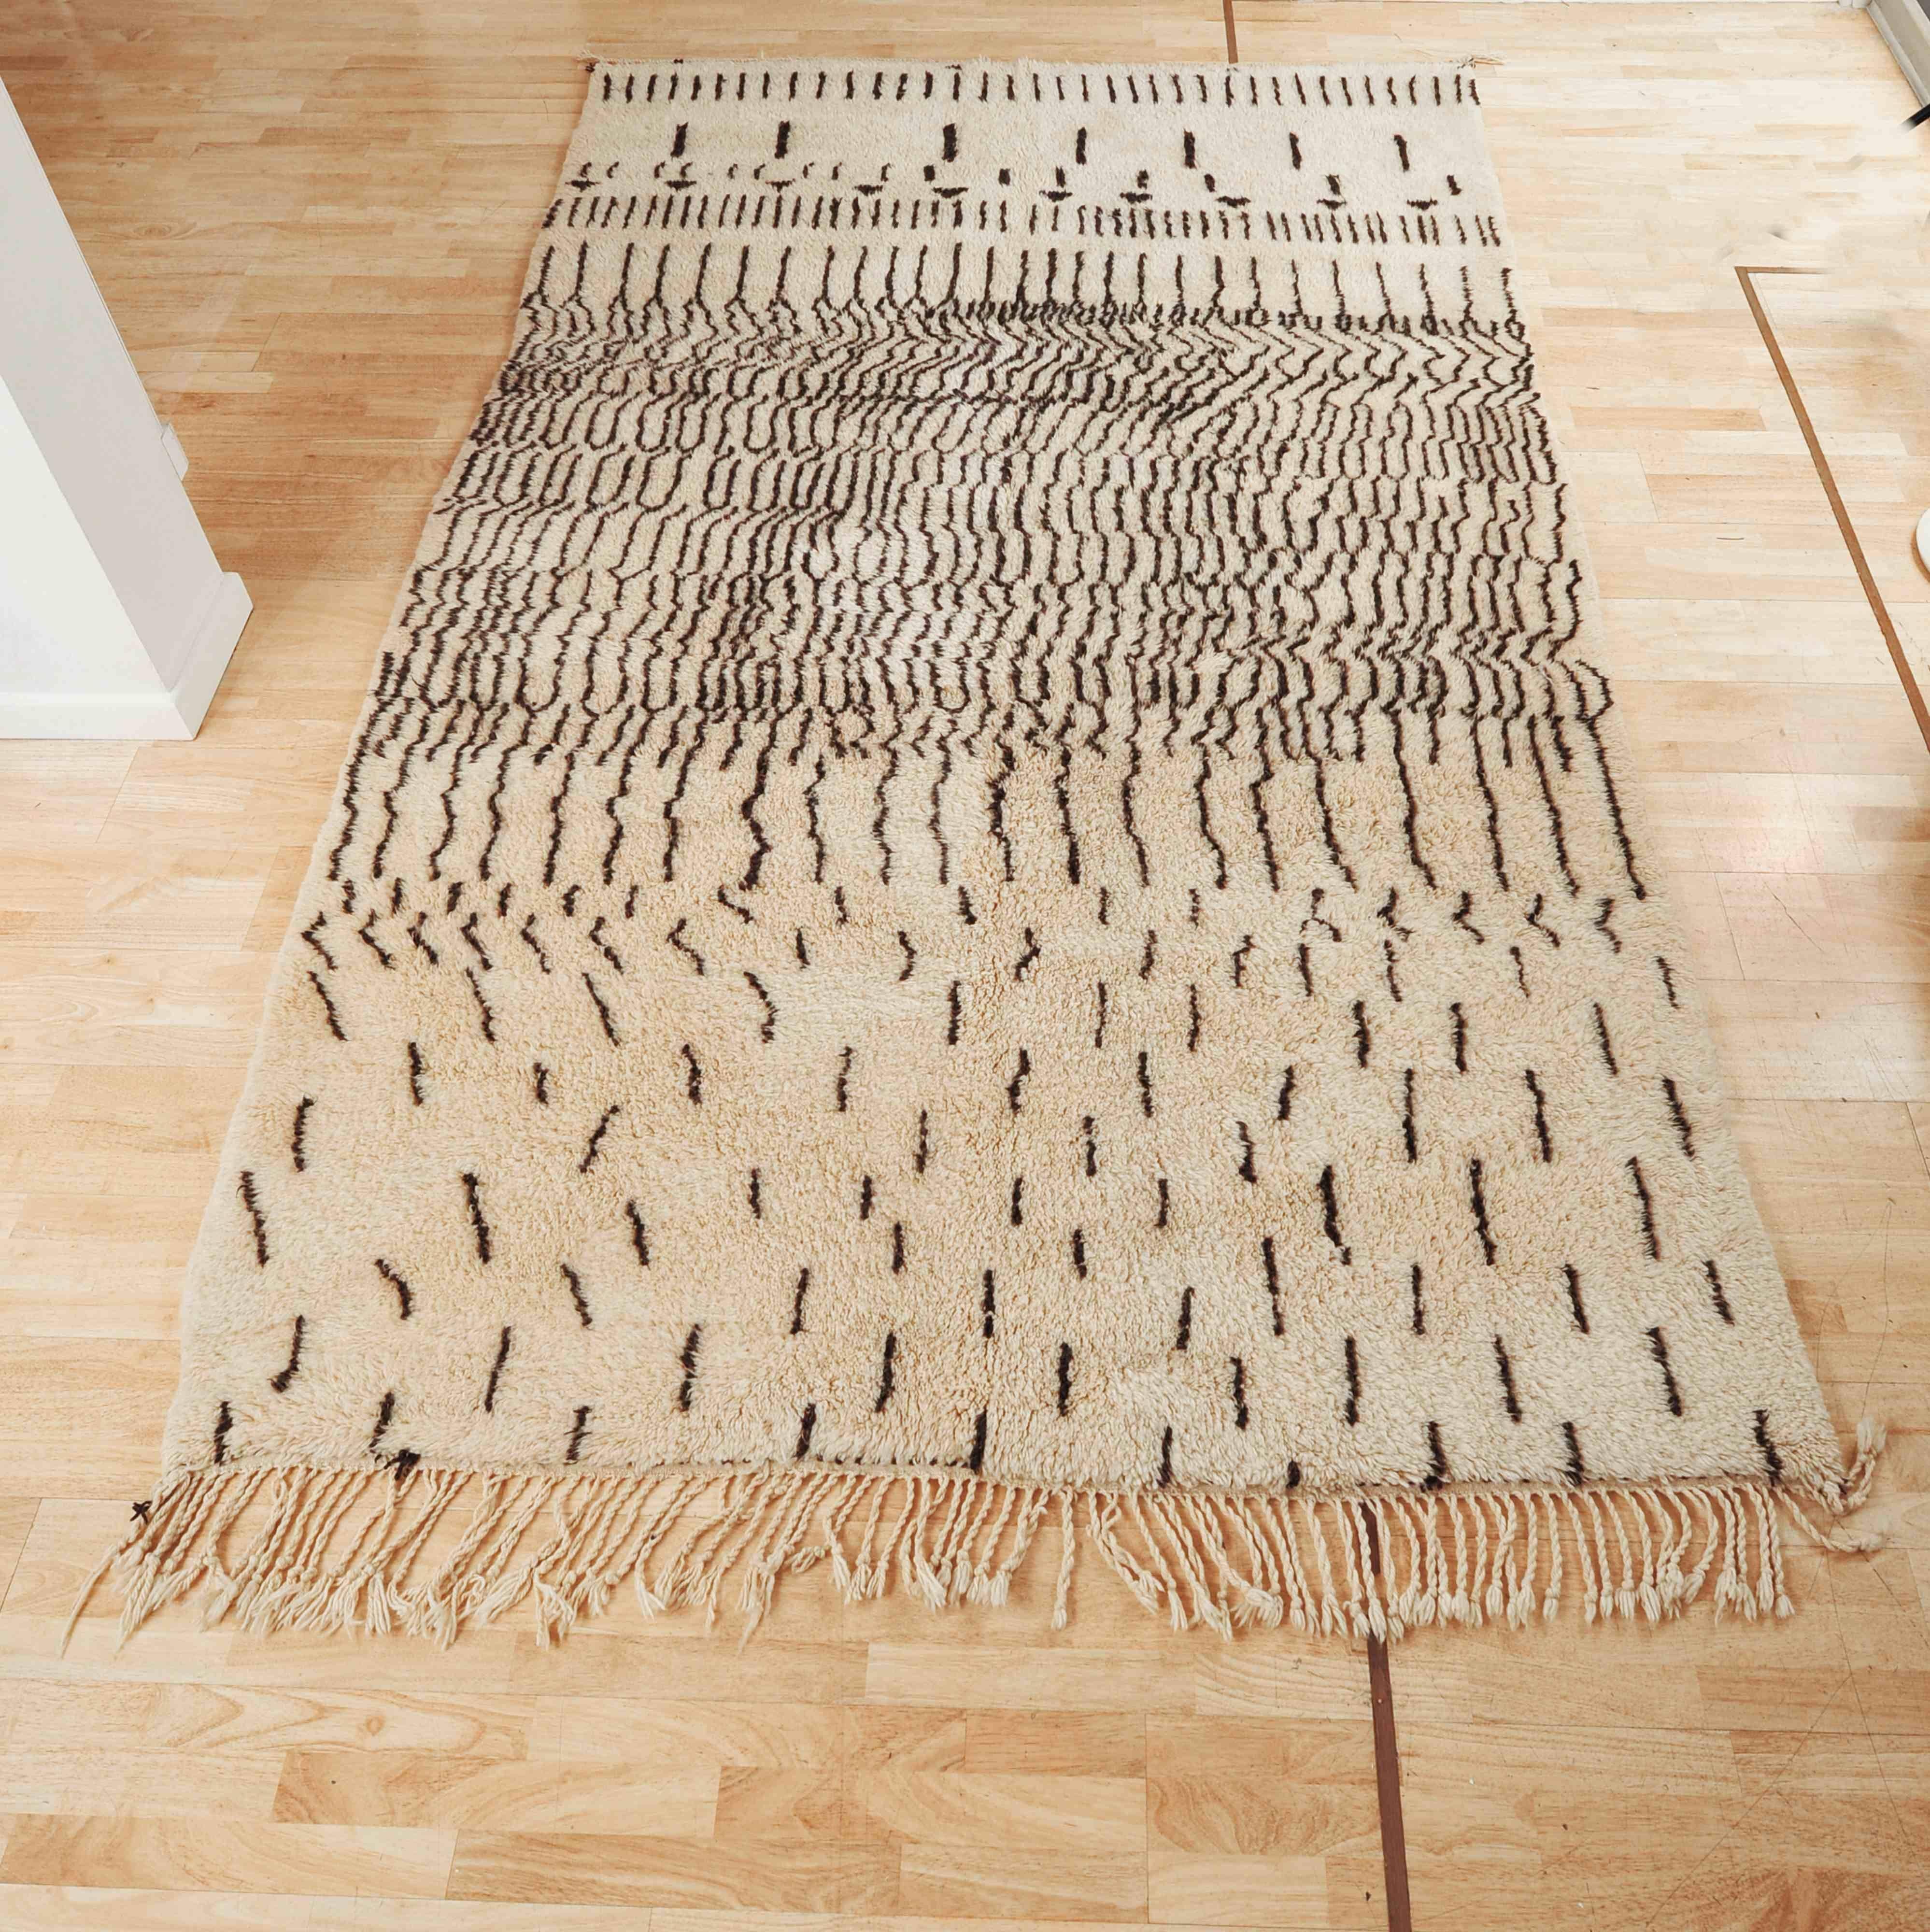 Best quality Beni Ourain rug. This is a very densely knotted rug.

Hand-knotted with very high knot count. Can be seen in pictures of back of rug.

Pile is 3.5cm high, weight 26 kilos

Rare design.

From Atlas mountains.